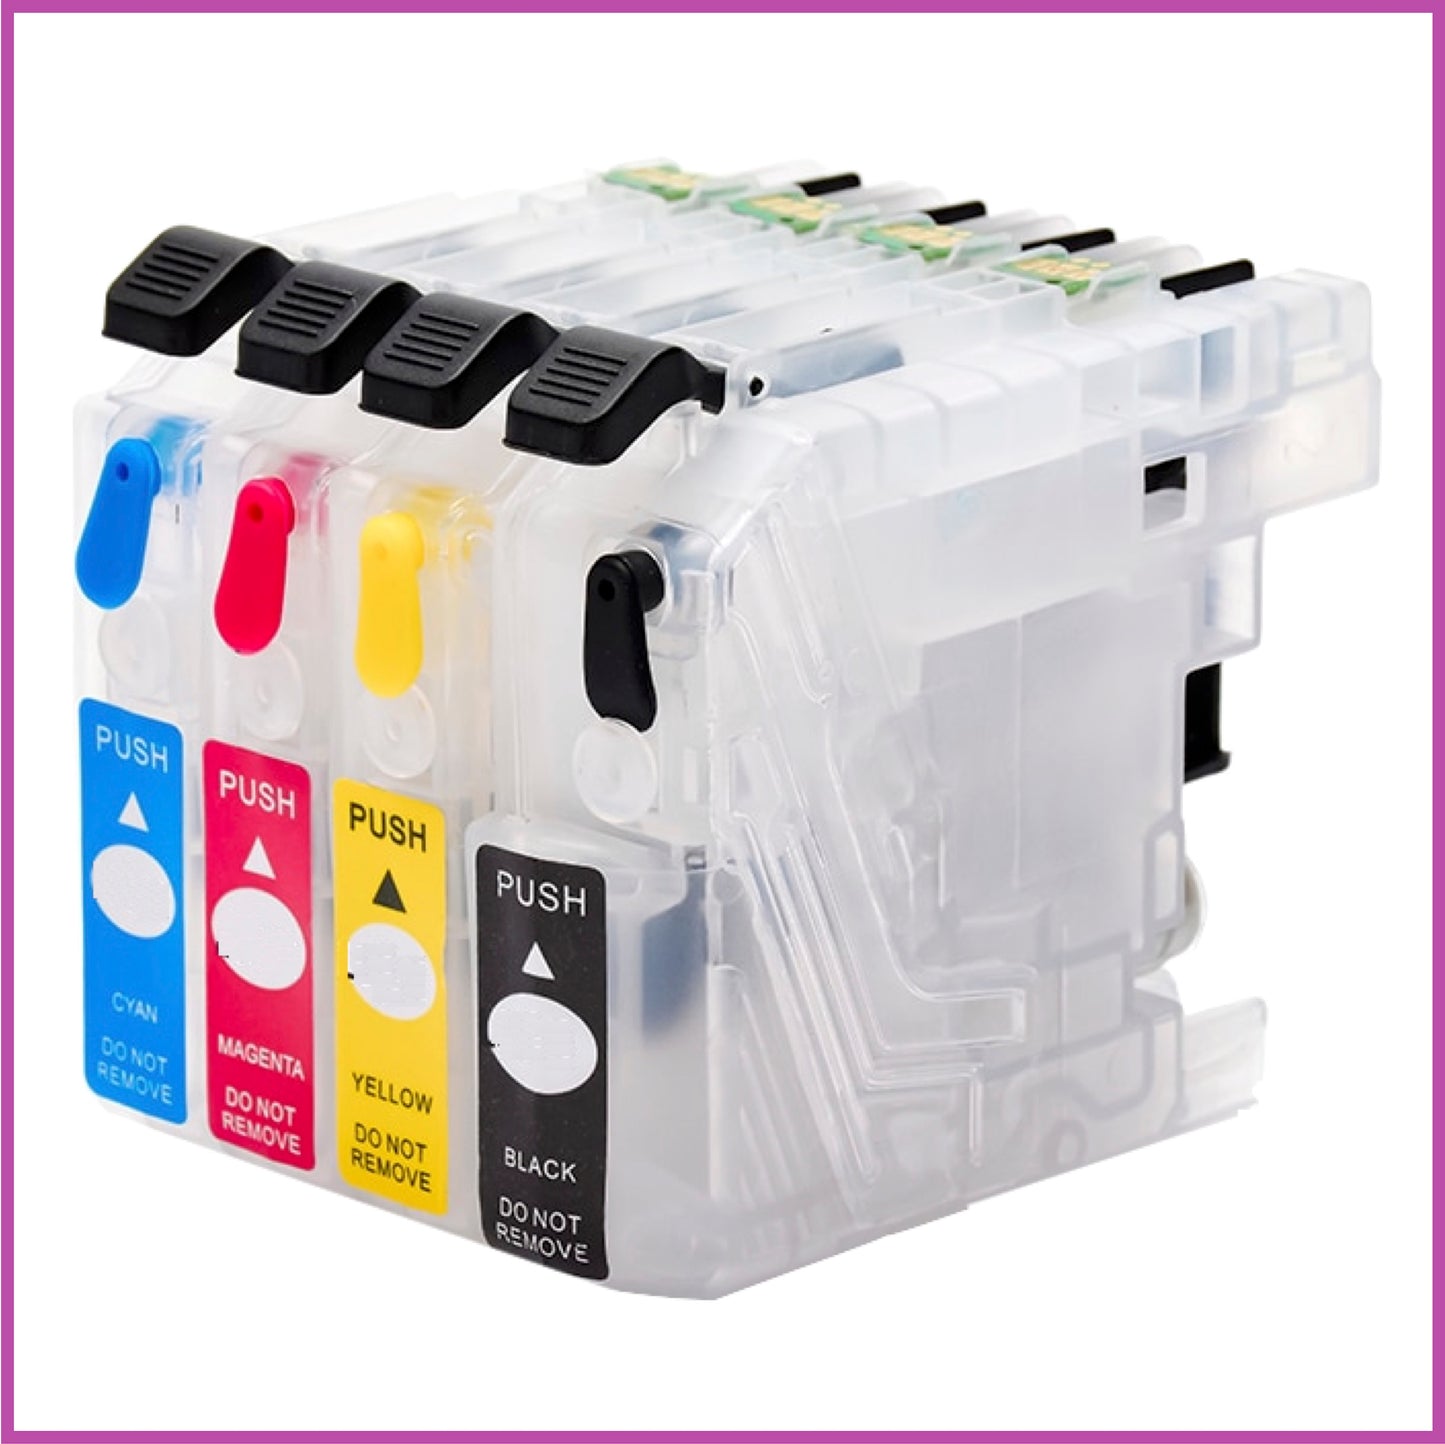 Refillable 123XL Cartridges with ARC Chips for Brother